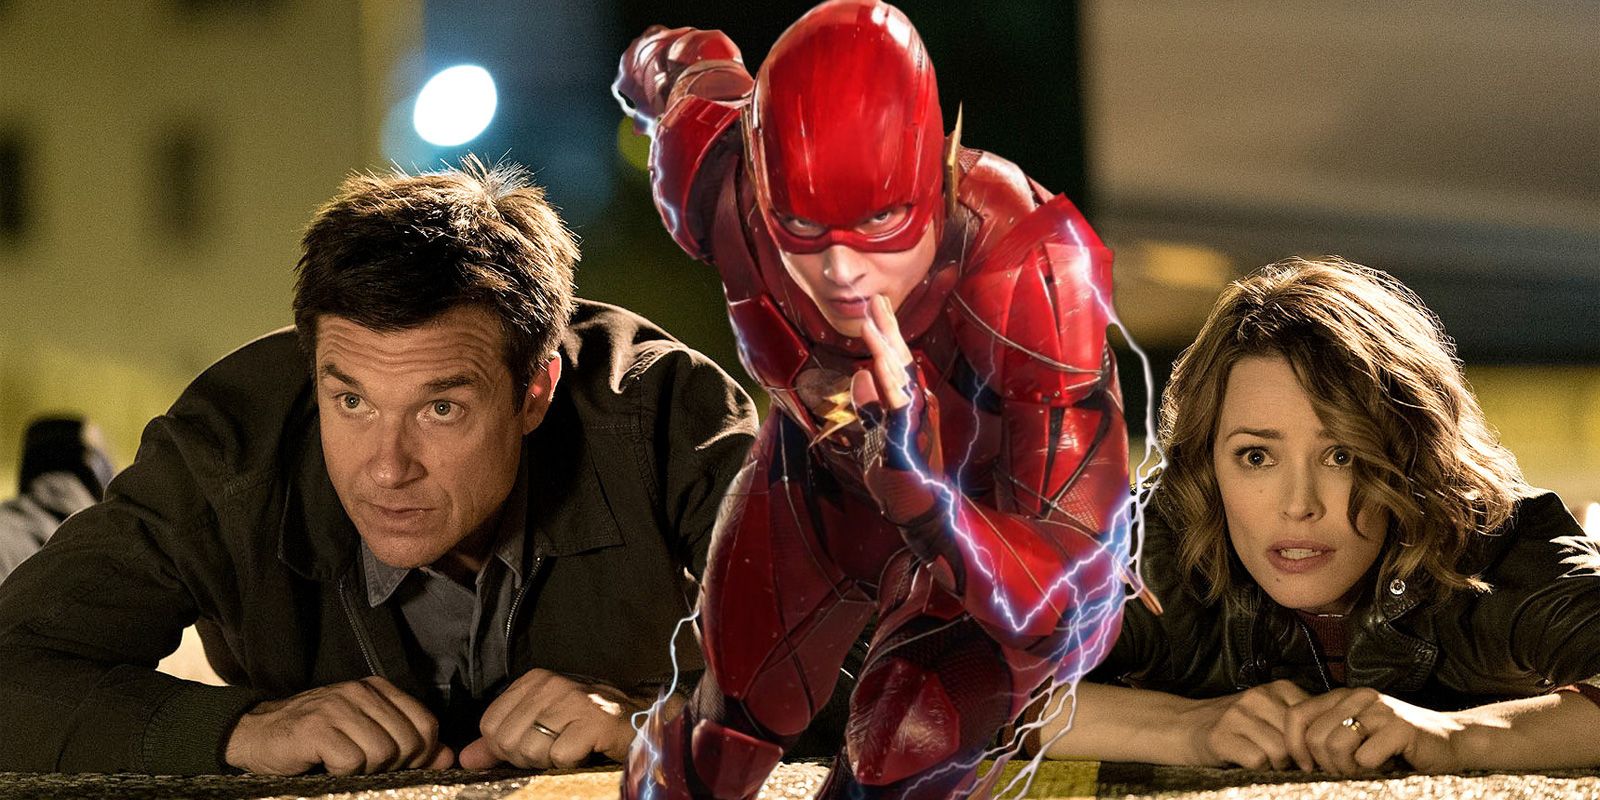 The Flash Movie Every Update You Need to Know